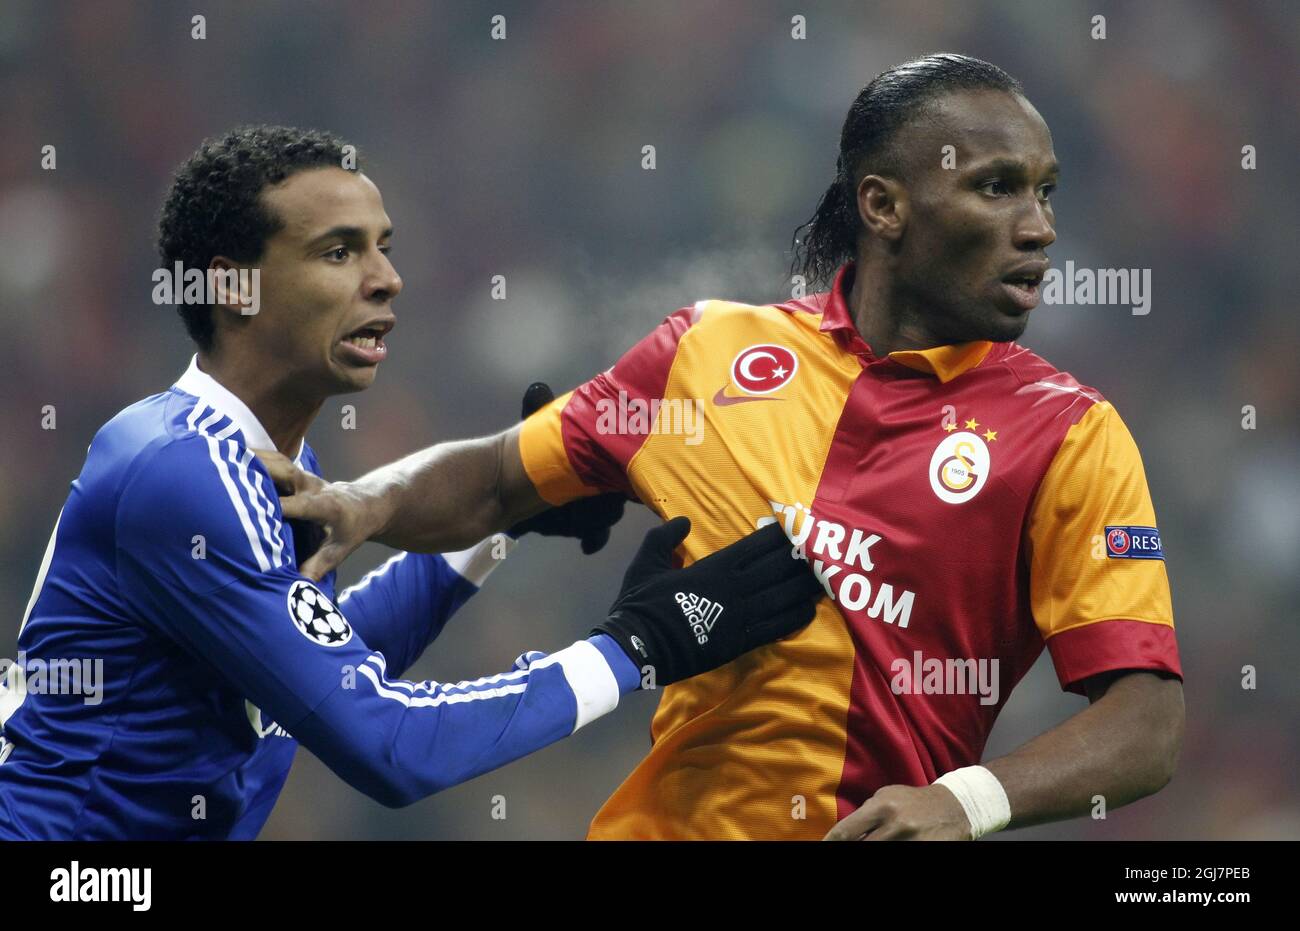 Galatasaray's Didier Drogba (right) and Schalke 04's Joel Matip during their UEFA Champions League Round of 16 First Leg match Galatasaray between Schalke 04 at the TT Arena Ali Sami Yen Spor Kompleksi in Istanbul, Turkey on Wednesday 20 February 2013. Stock Photo